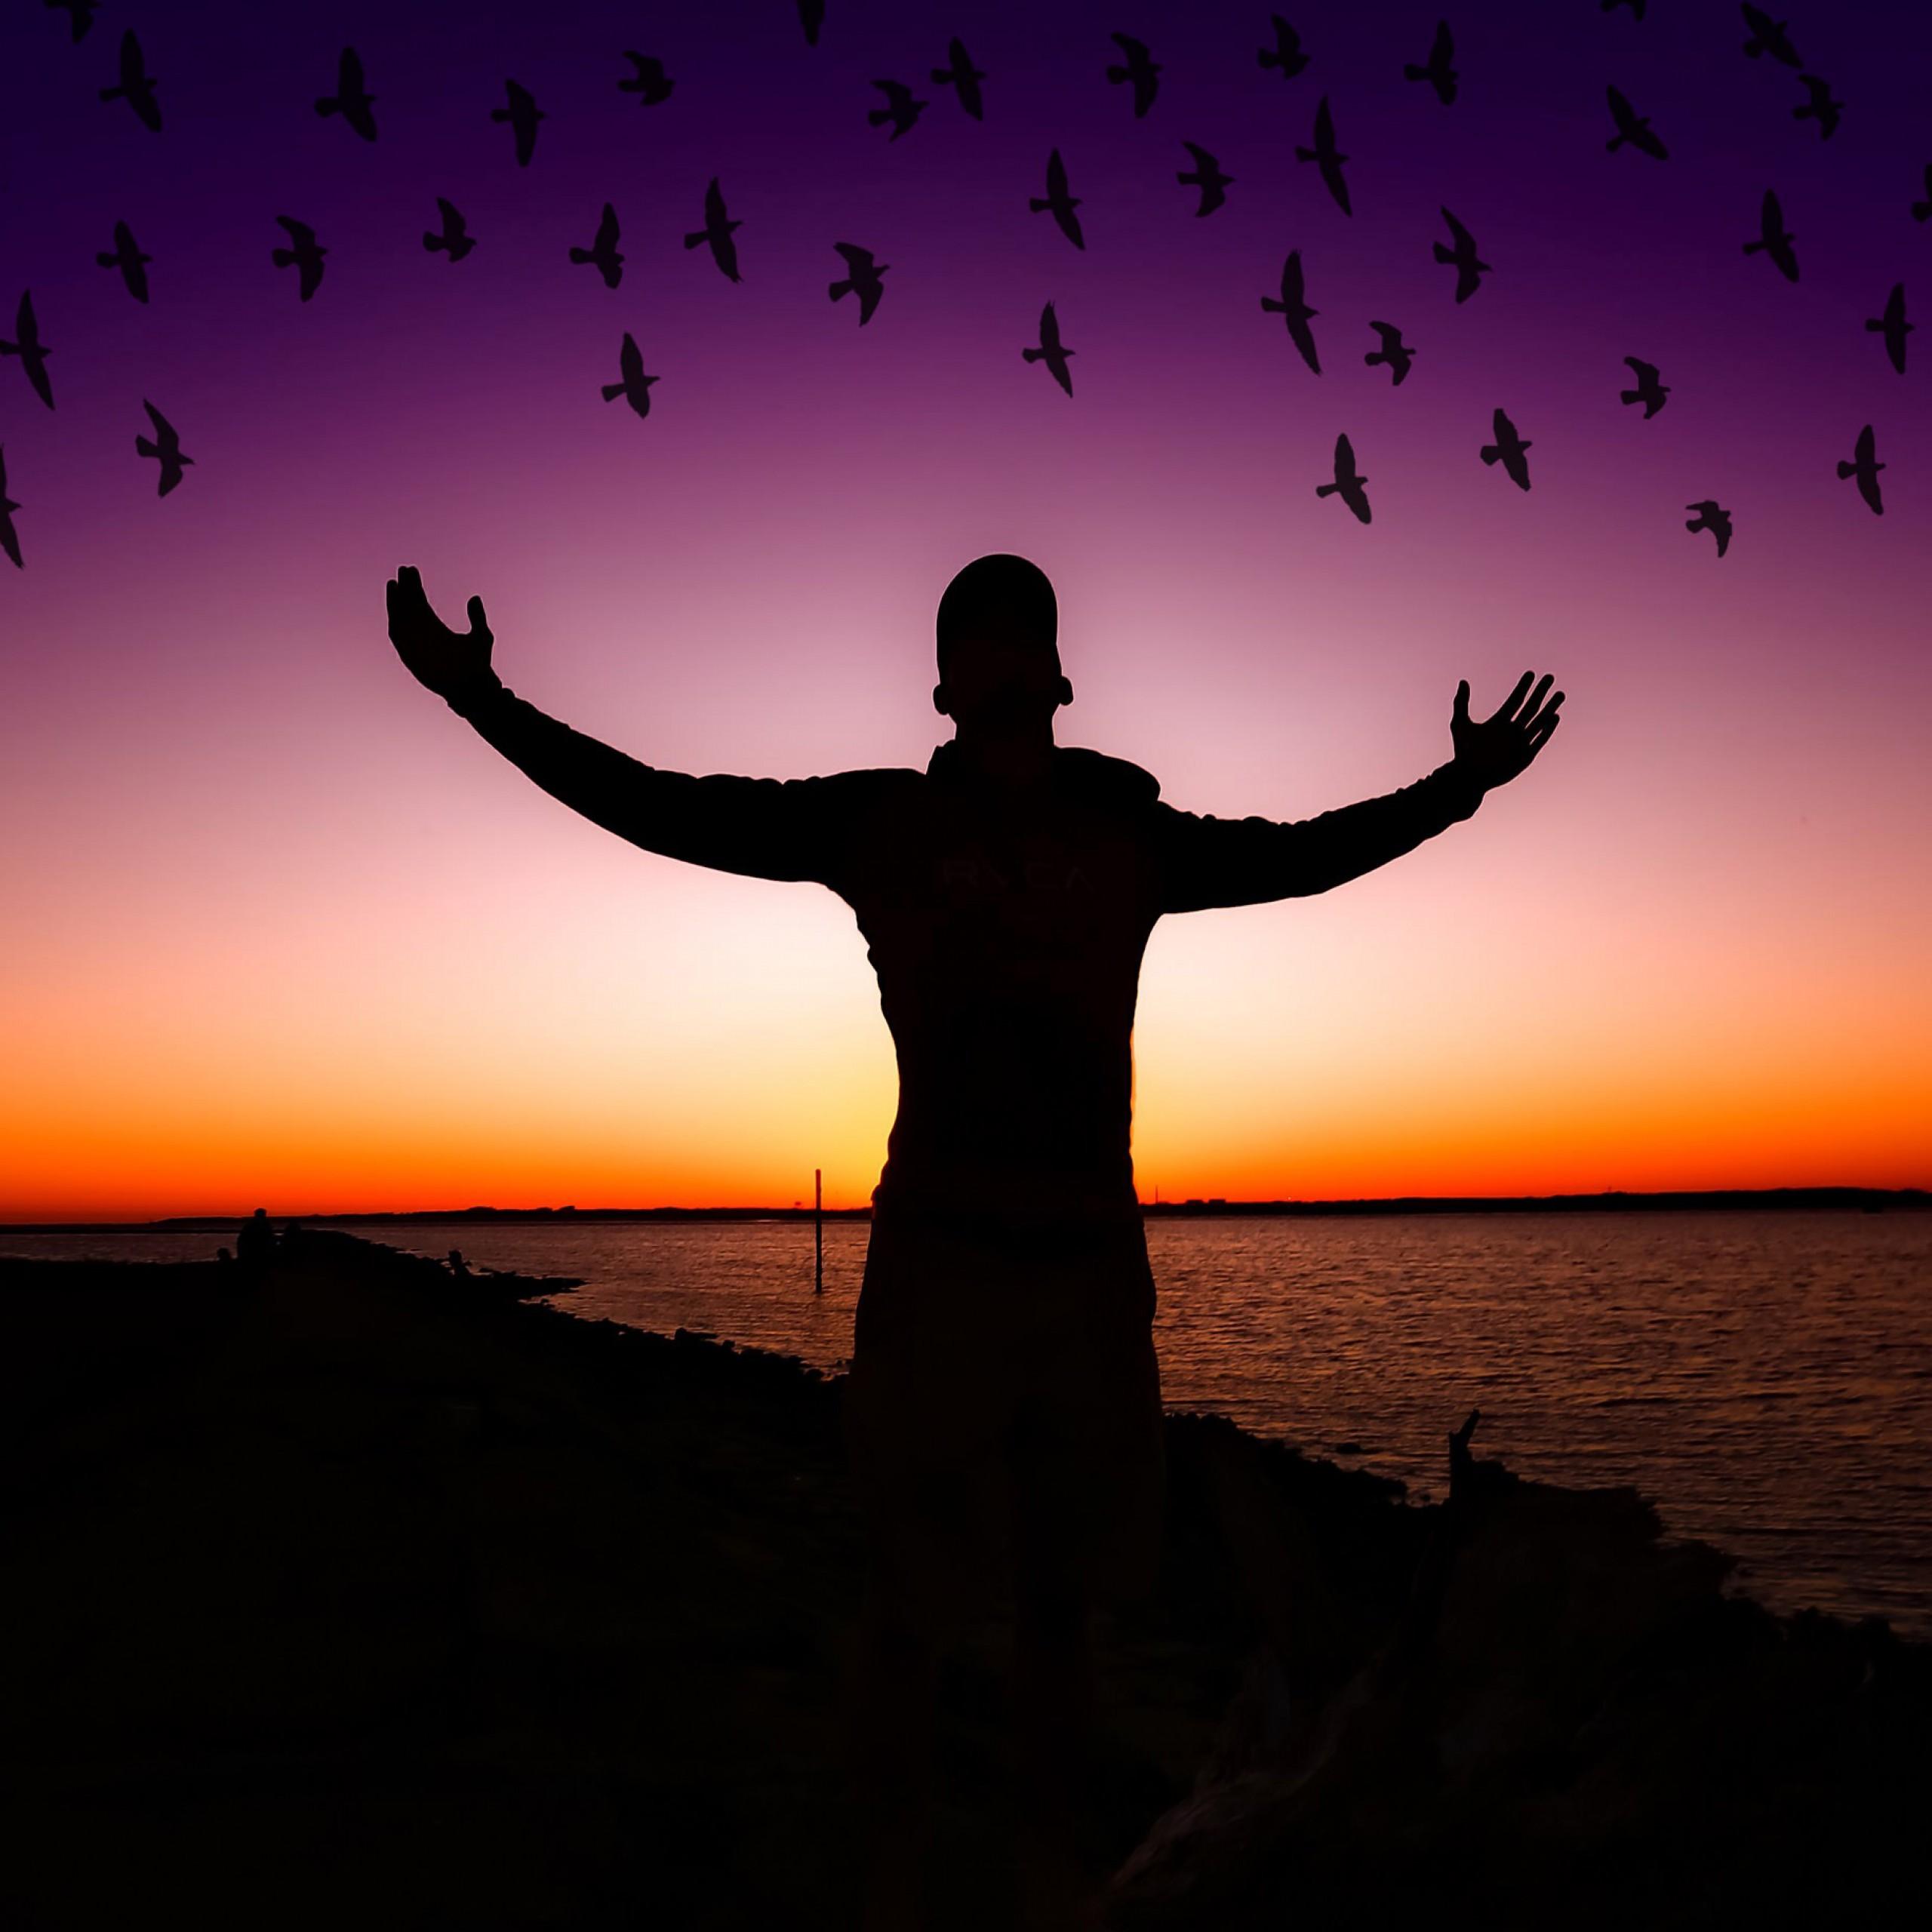 Wallpaper Exciting, Happy mood, Birds, Sunset, Silhouette